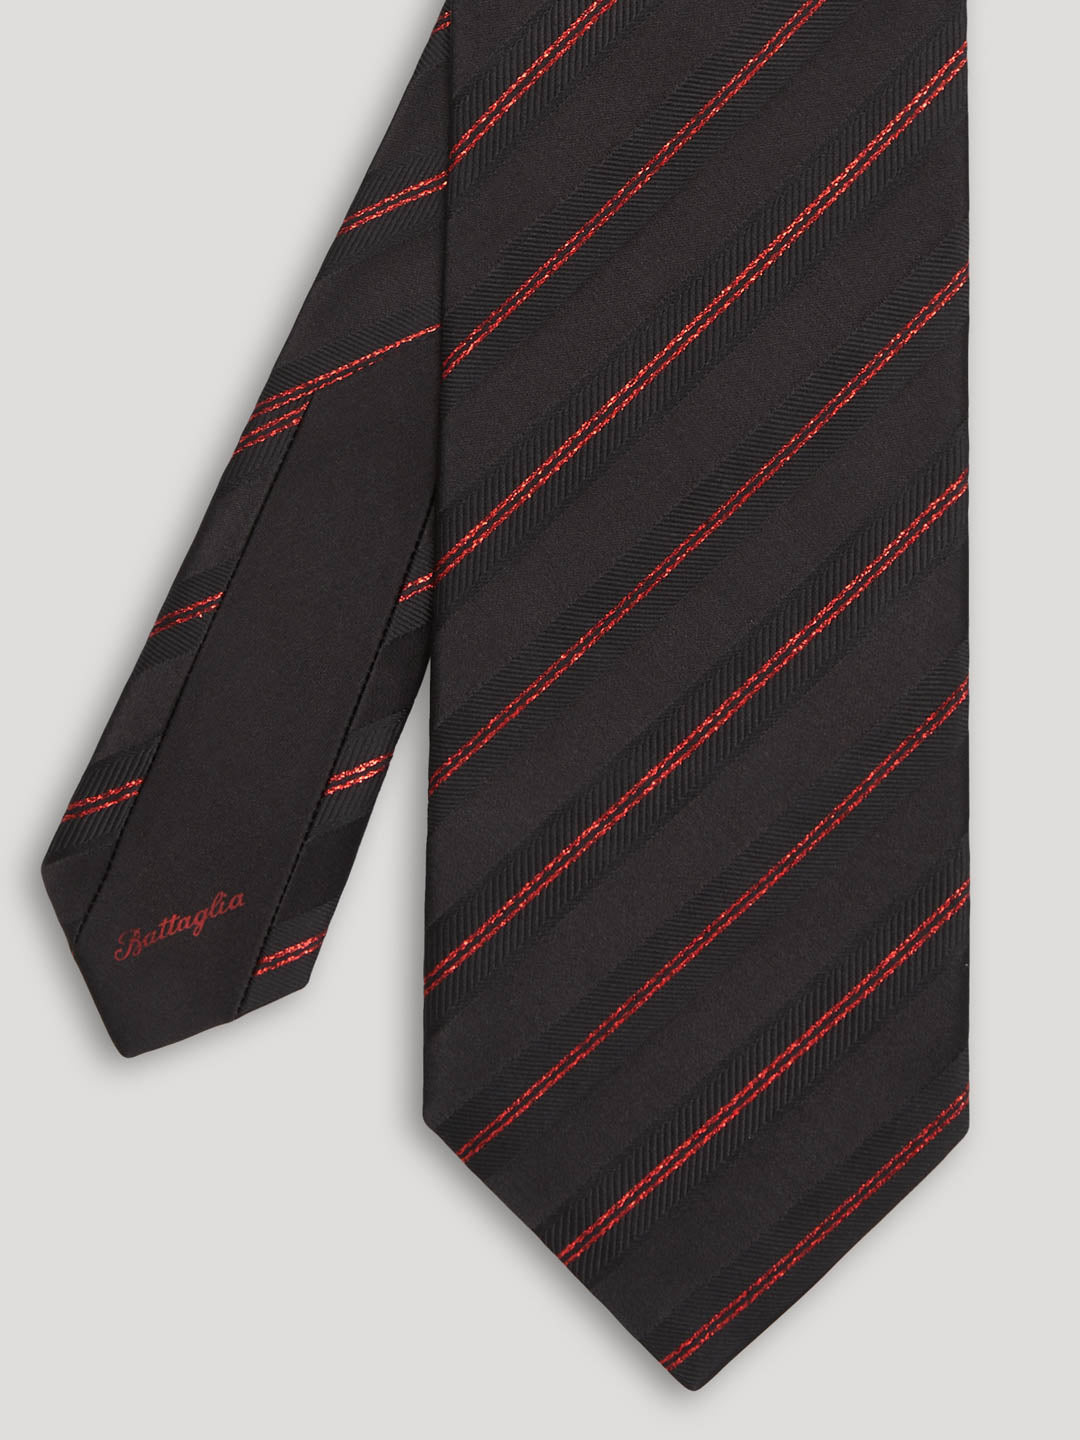 Black tie with red stripes. 